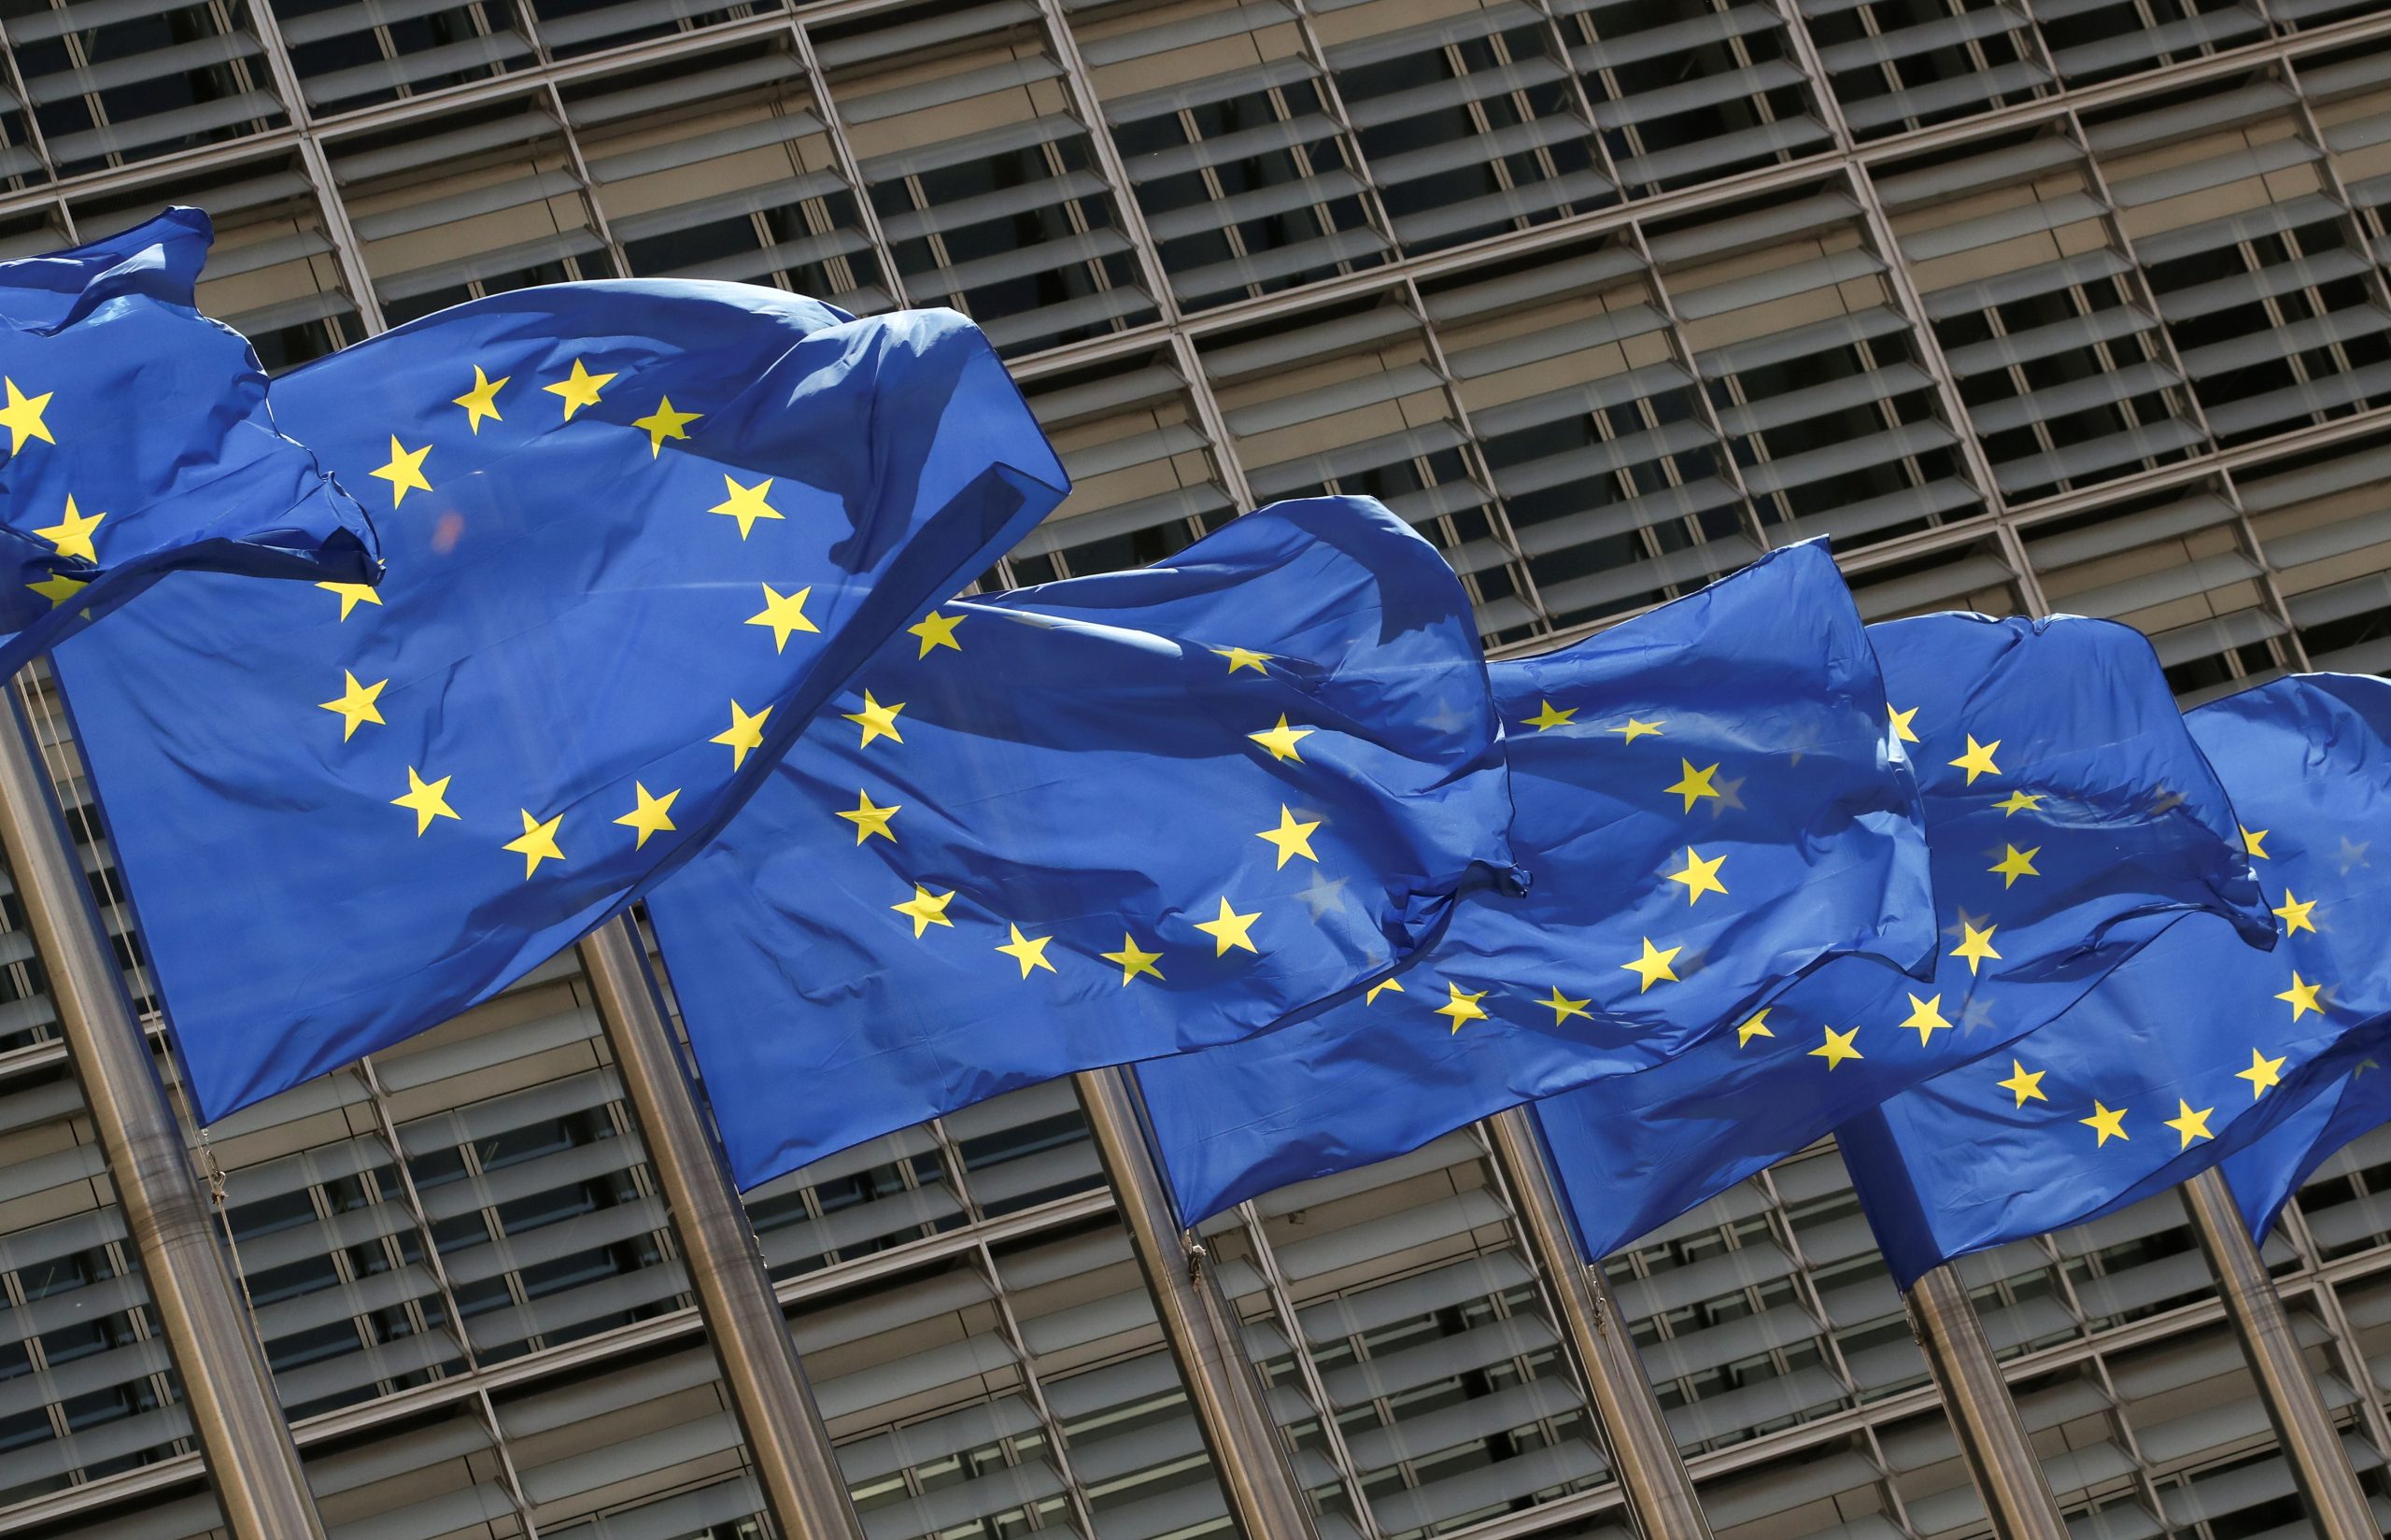 EU advisory group begins work on addressing financial deficit in partner countries